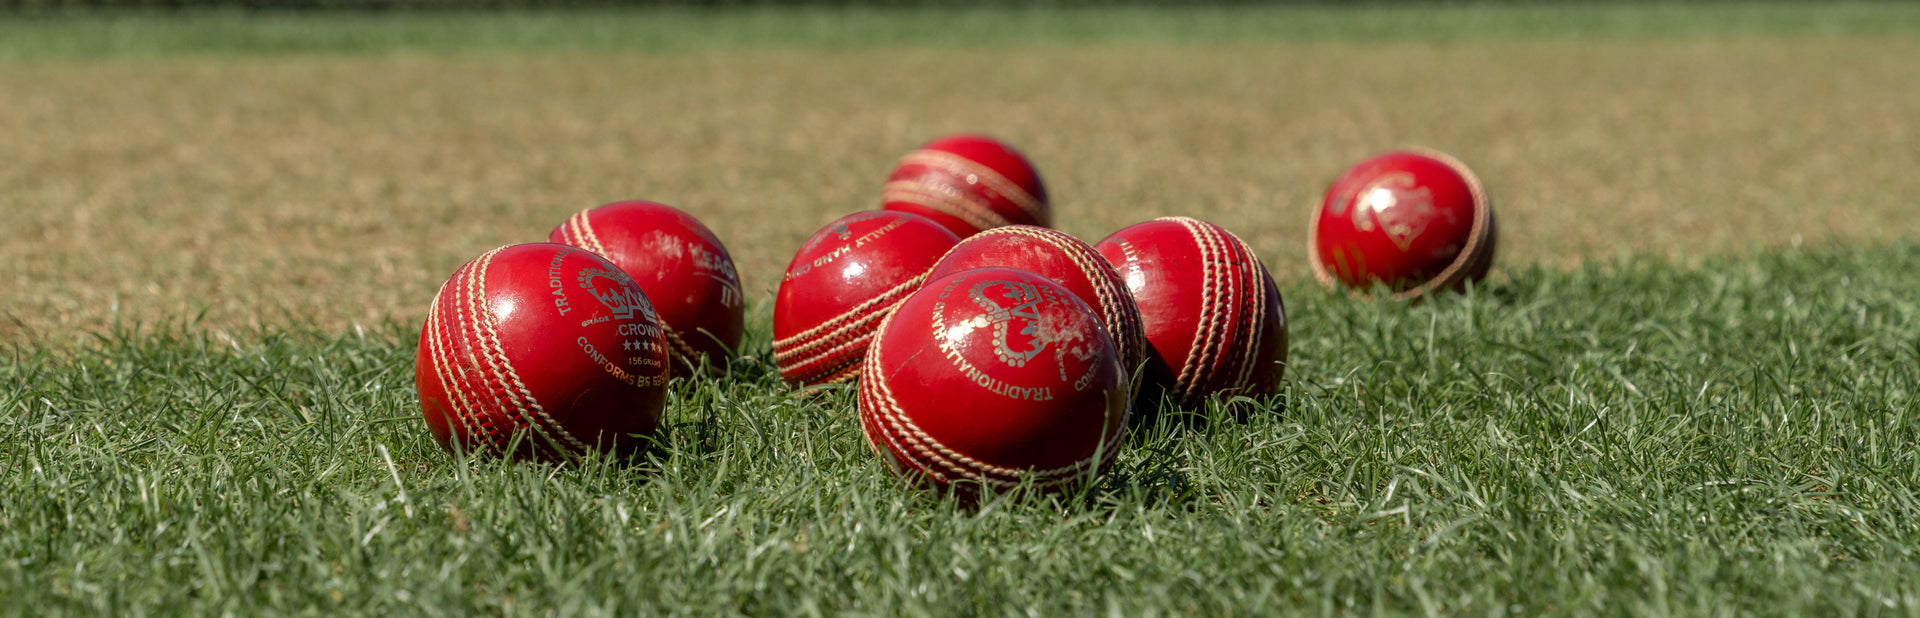 Gray-Nicolls extend partnership with Sussex Cricket League